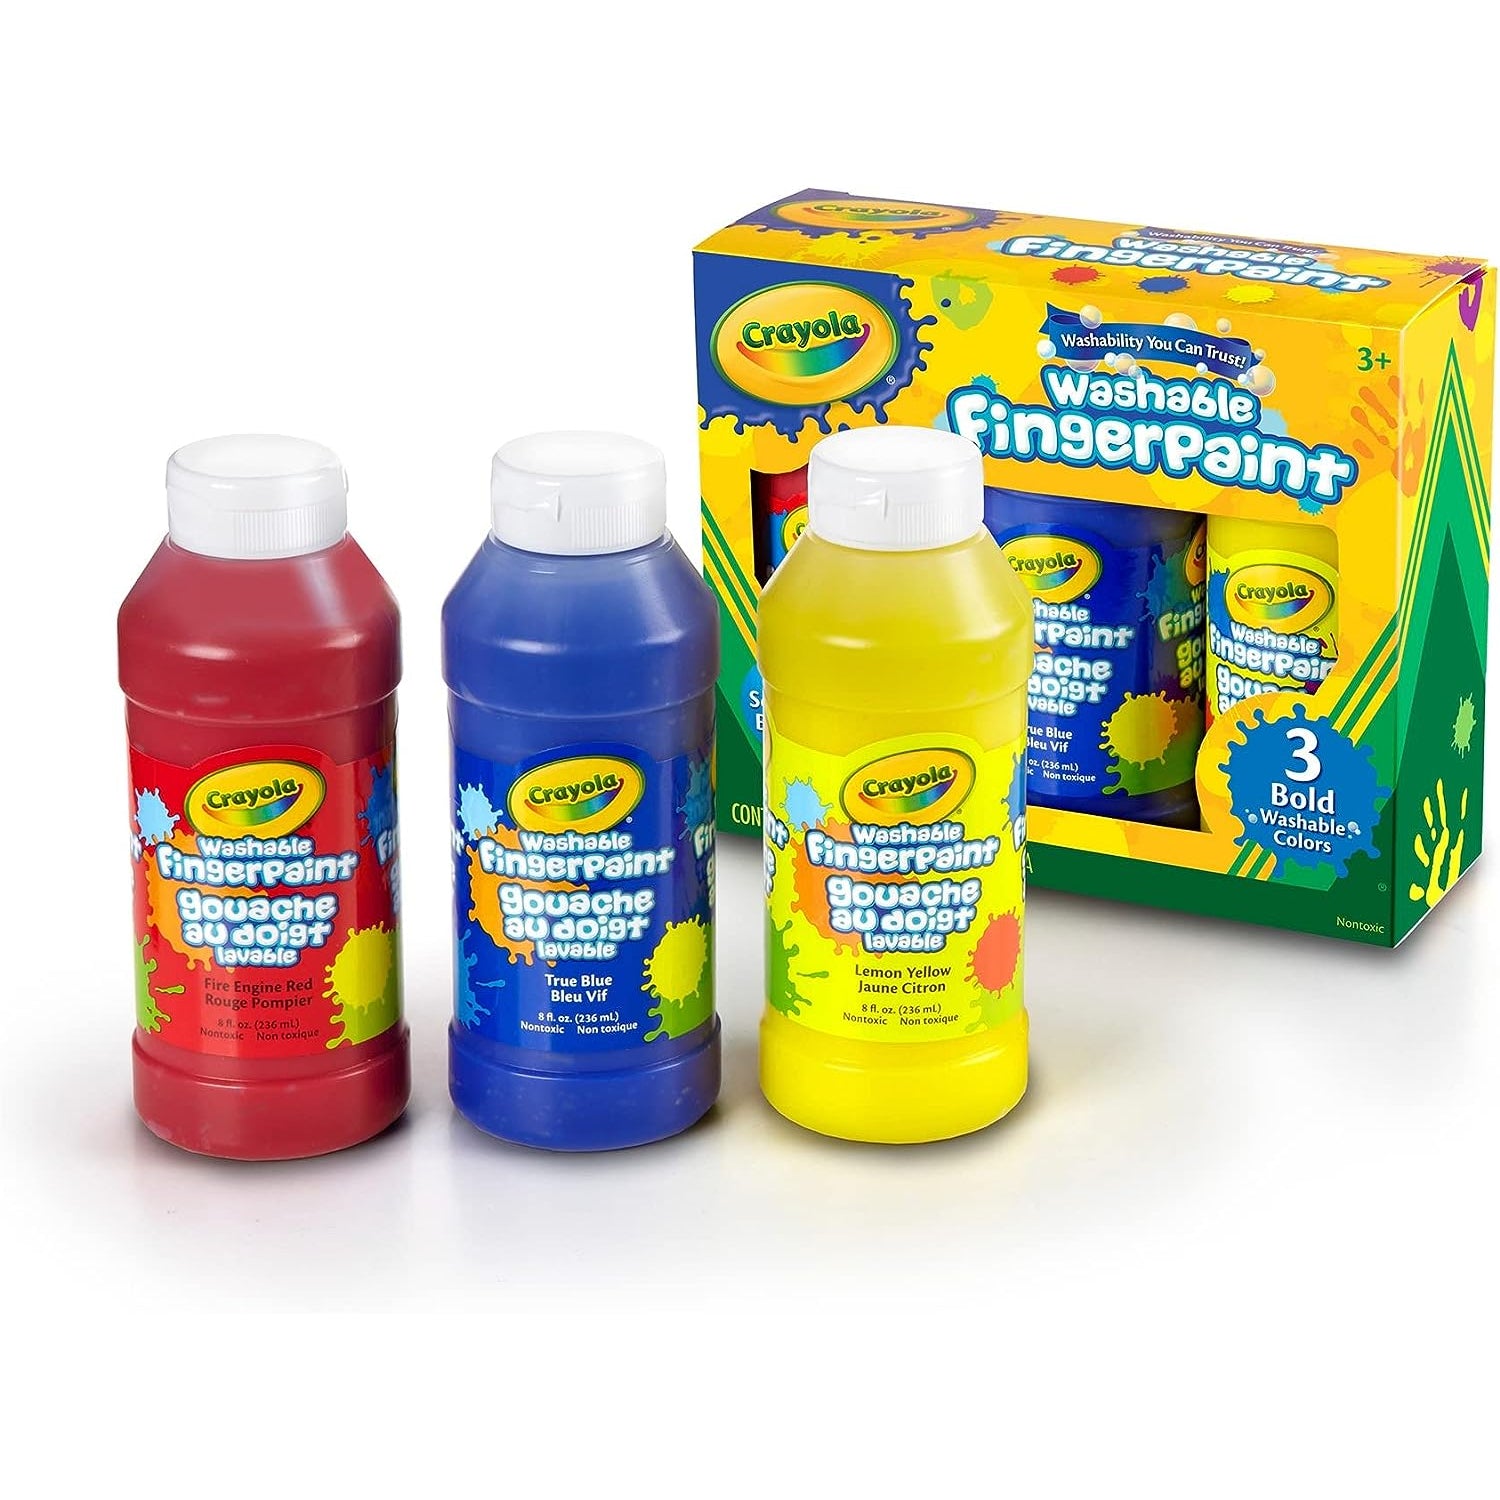 Crayola 8-Ounce Washable Fingerpaint-Primary (3 Count)